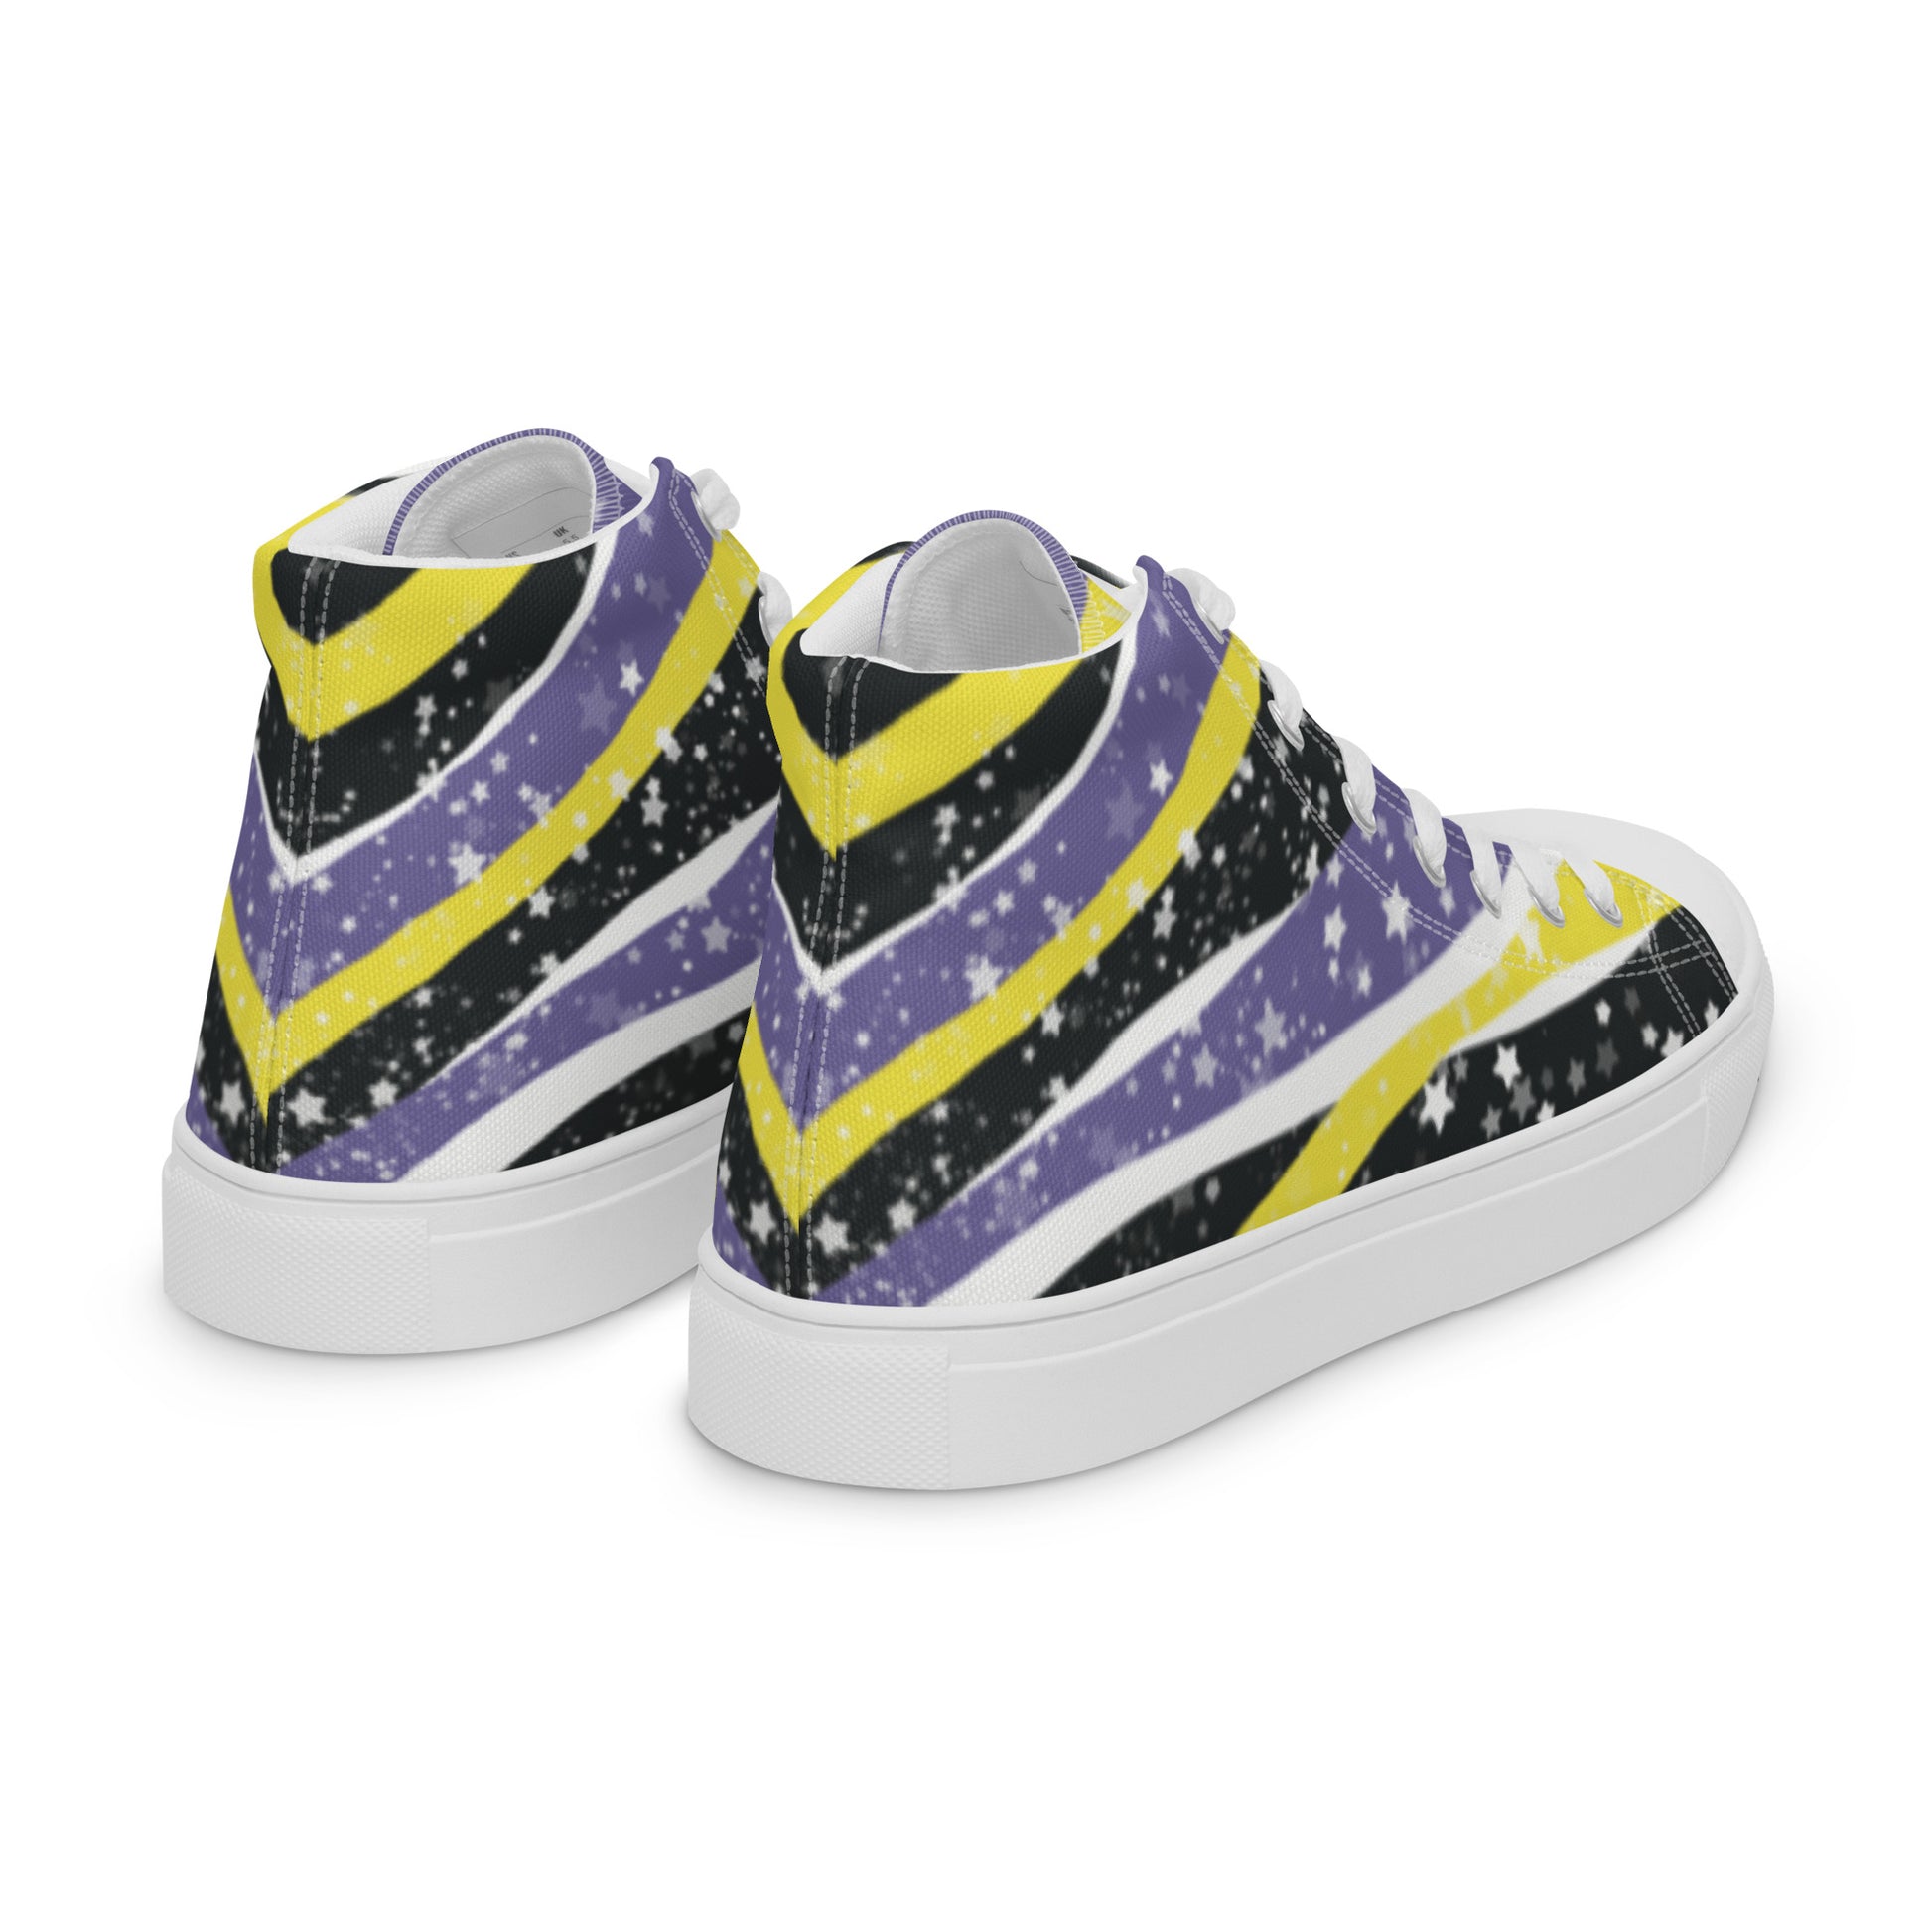 Right back view: a pair of high-top shoes with ribbons of the yellow, purple, and black of the non-binary pride flag coming from the heel and expanding towards the laces with an explosion of stars over it, white accents, and the Aras Sivad Studio logo in black on the tongue.